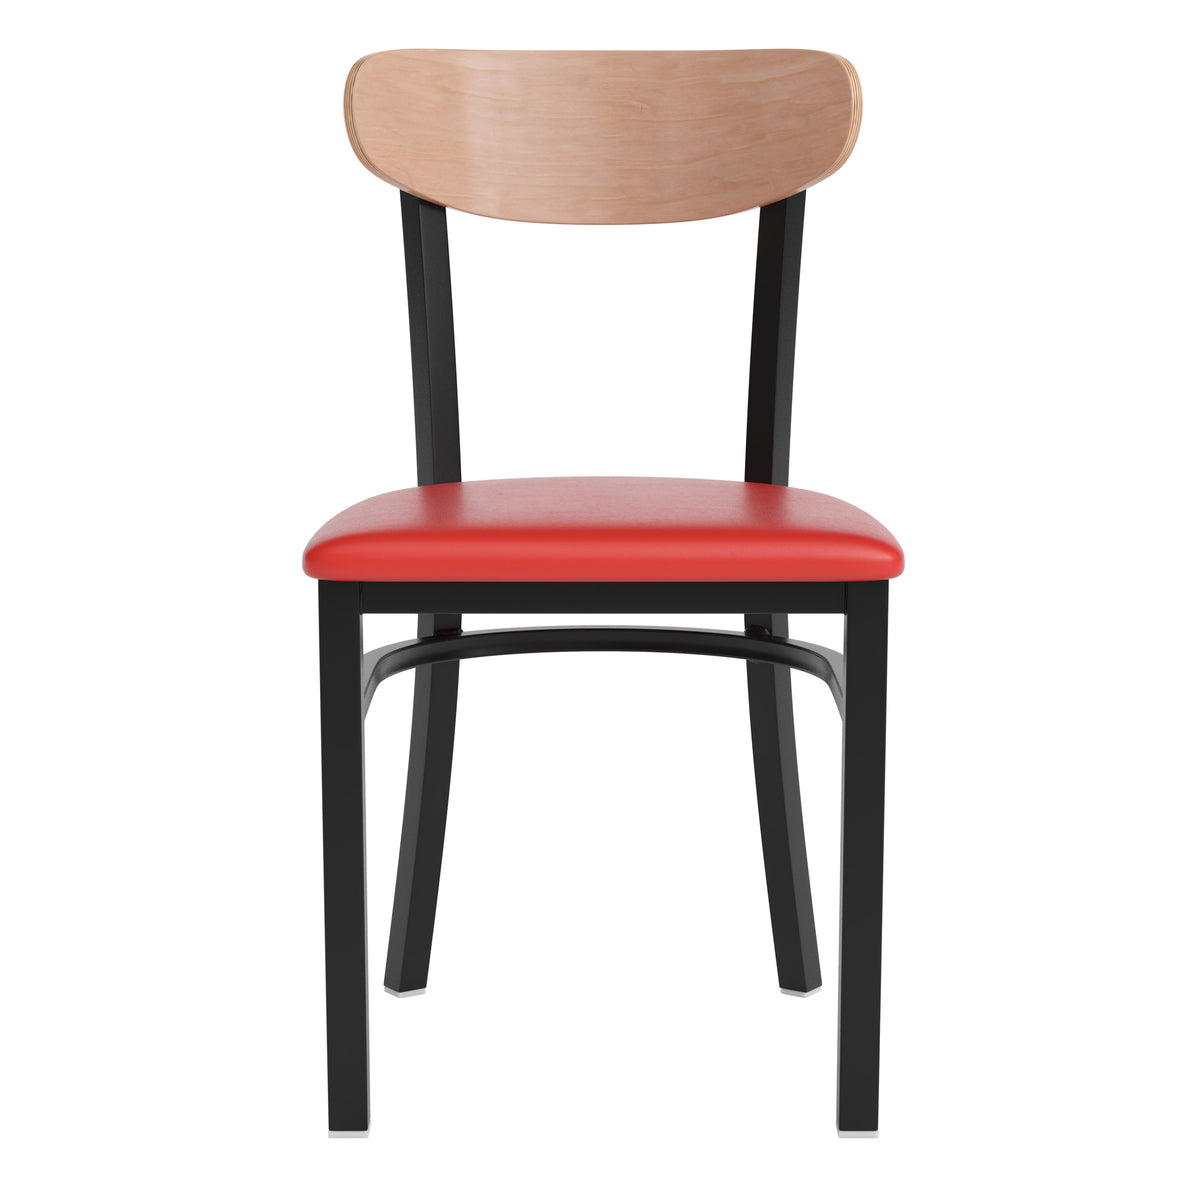 Natural Birch Wood Back/Red Vinyl Seat |#| Commercial Metal Dining Chair - Vinyl Seat and Wood Boomerang Back-Red/Natural